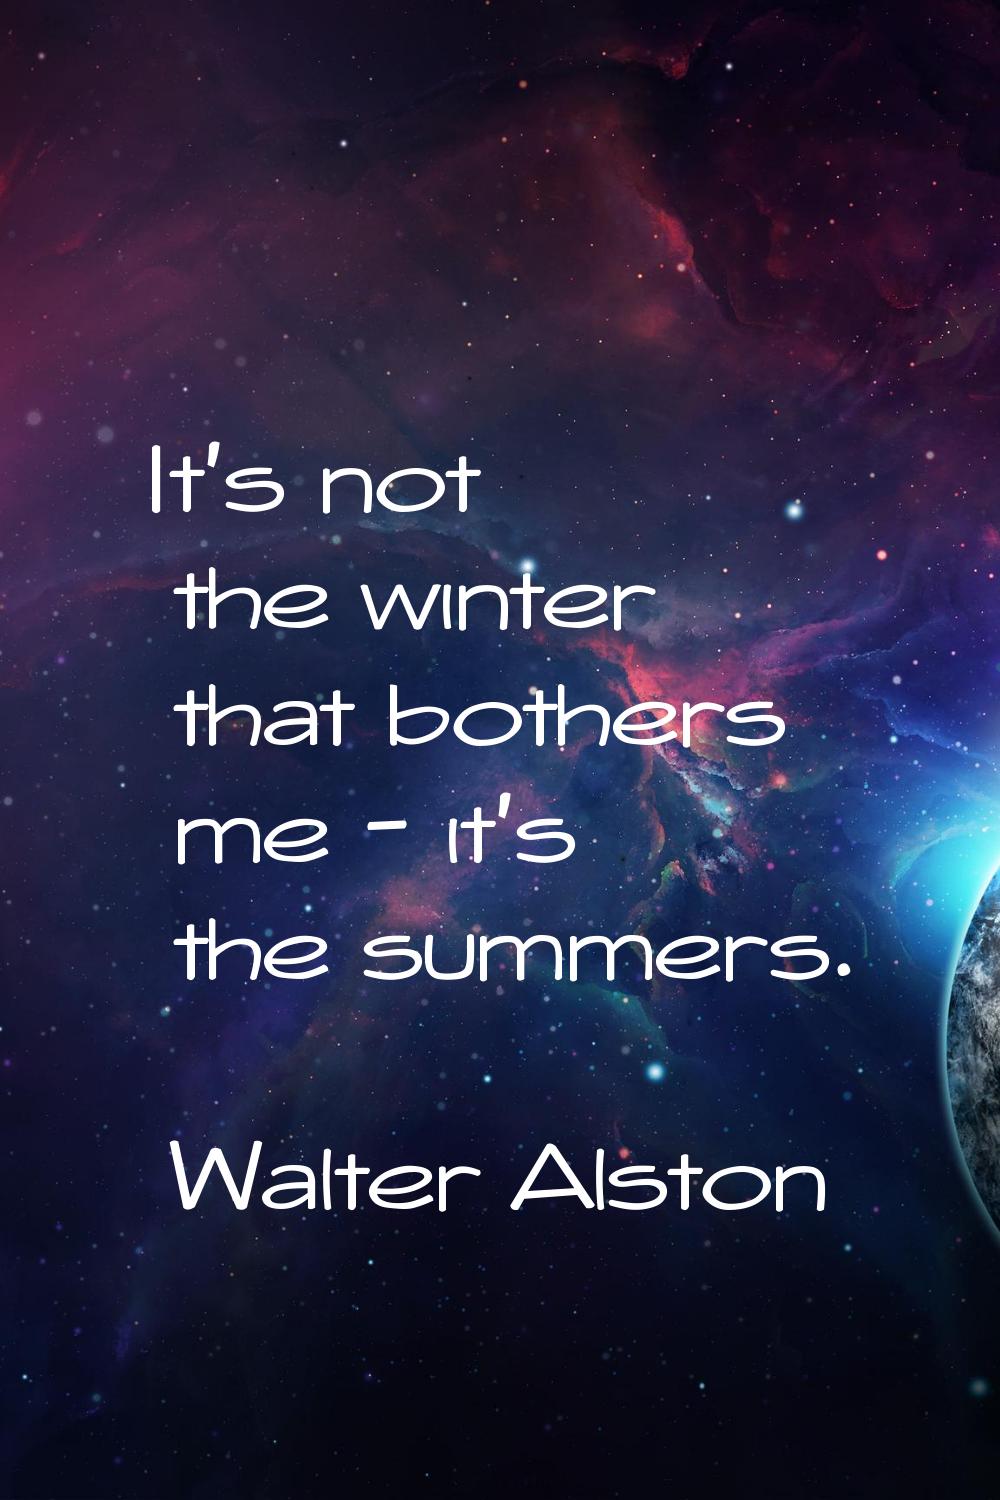 It's not the winter that bothers me - it's the summers.